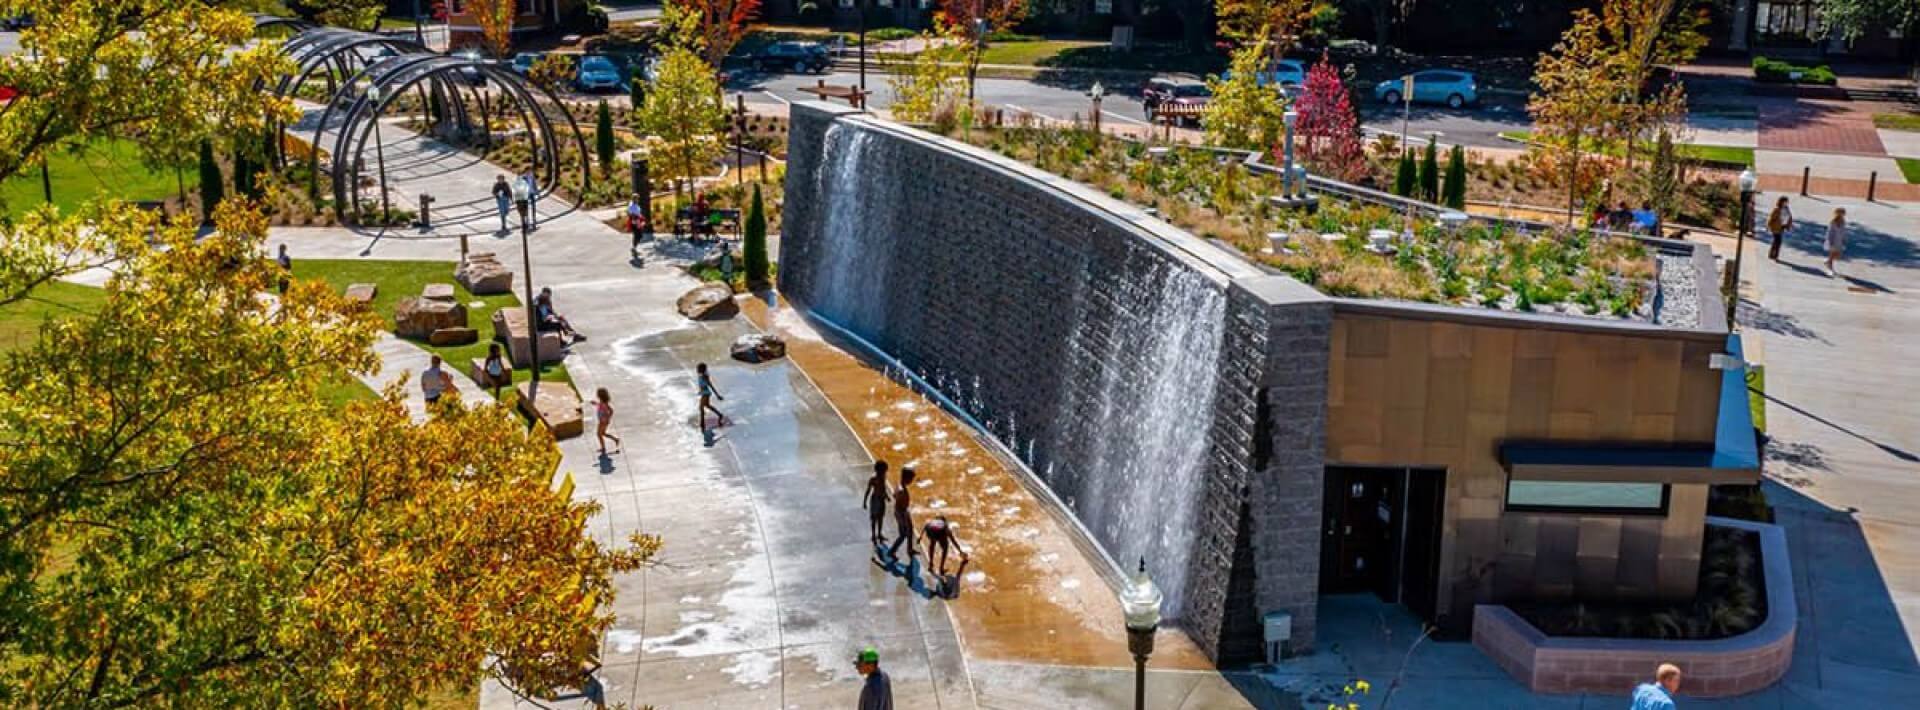 Martin Aquatic’s Placemaking Fountain at Heart of Newly Opened Bell Tower Green